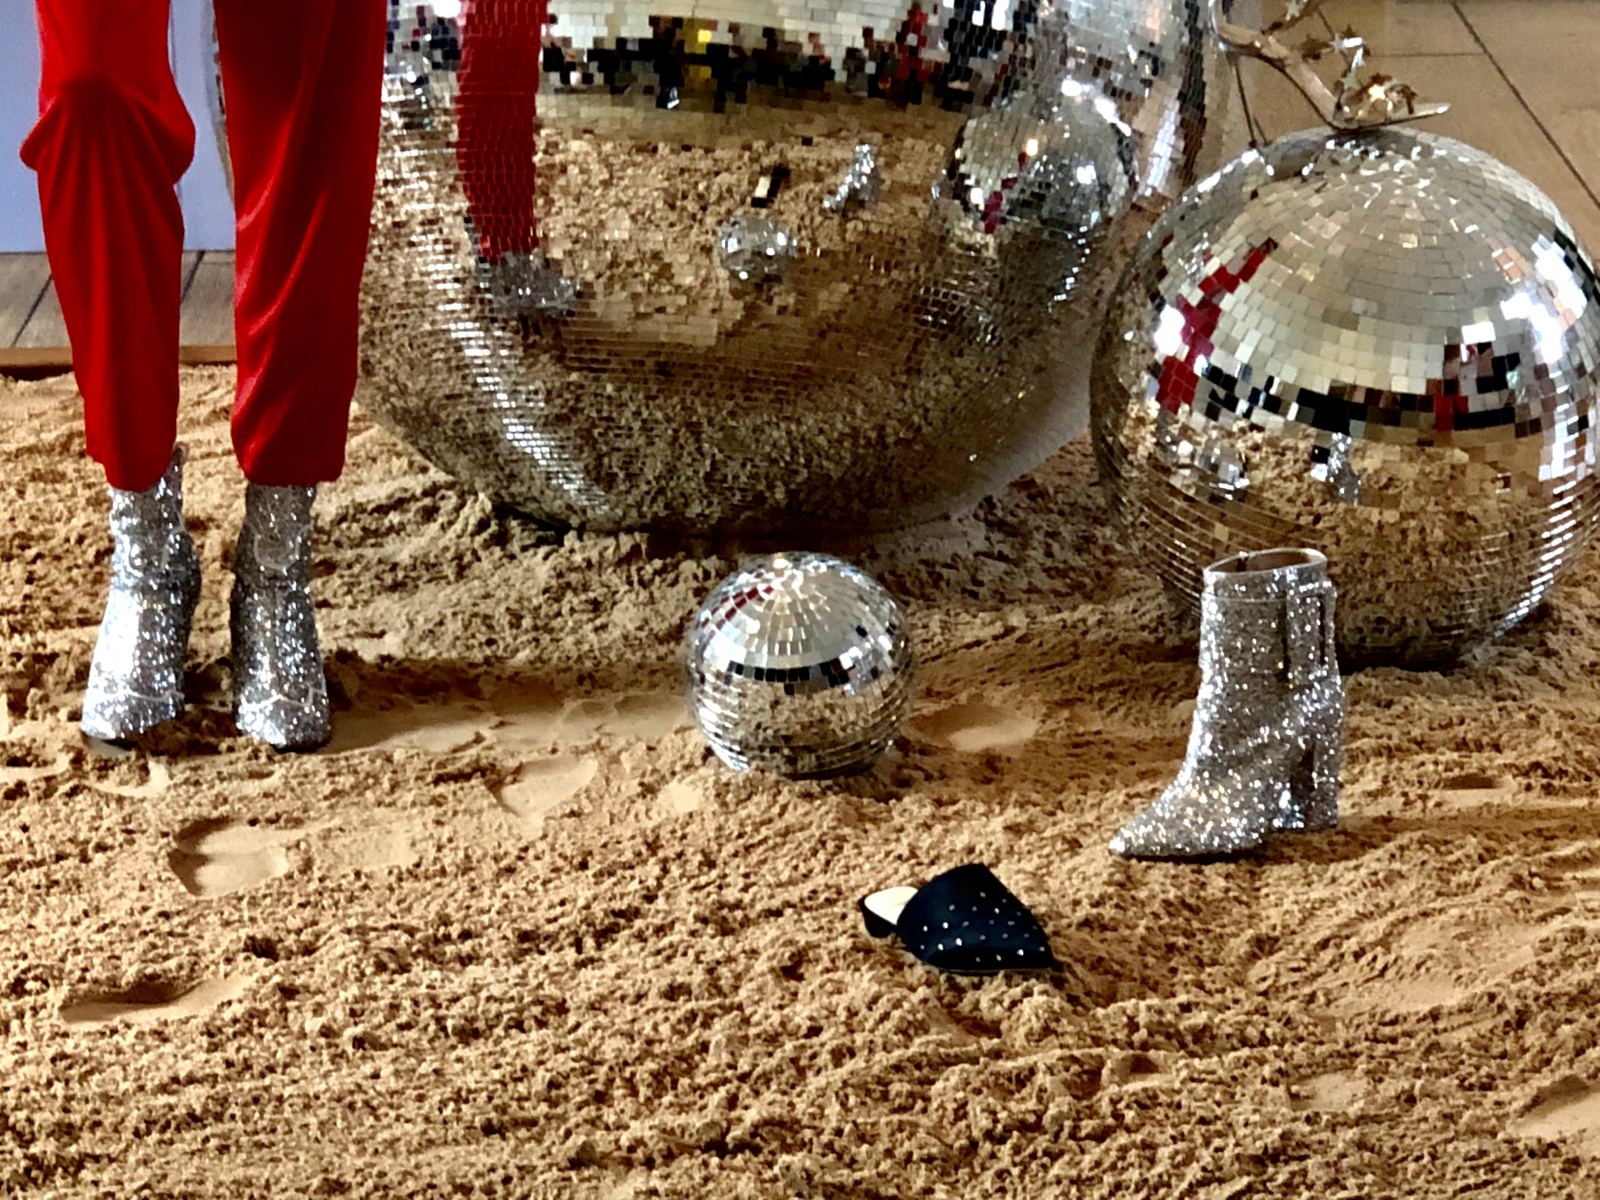 Alexander White FW18 London Fashion Week Lead Image of a disco ball and glittery cowboy boots